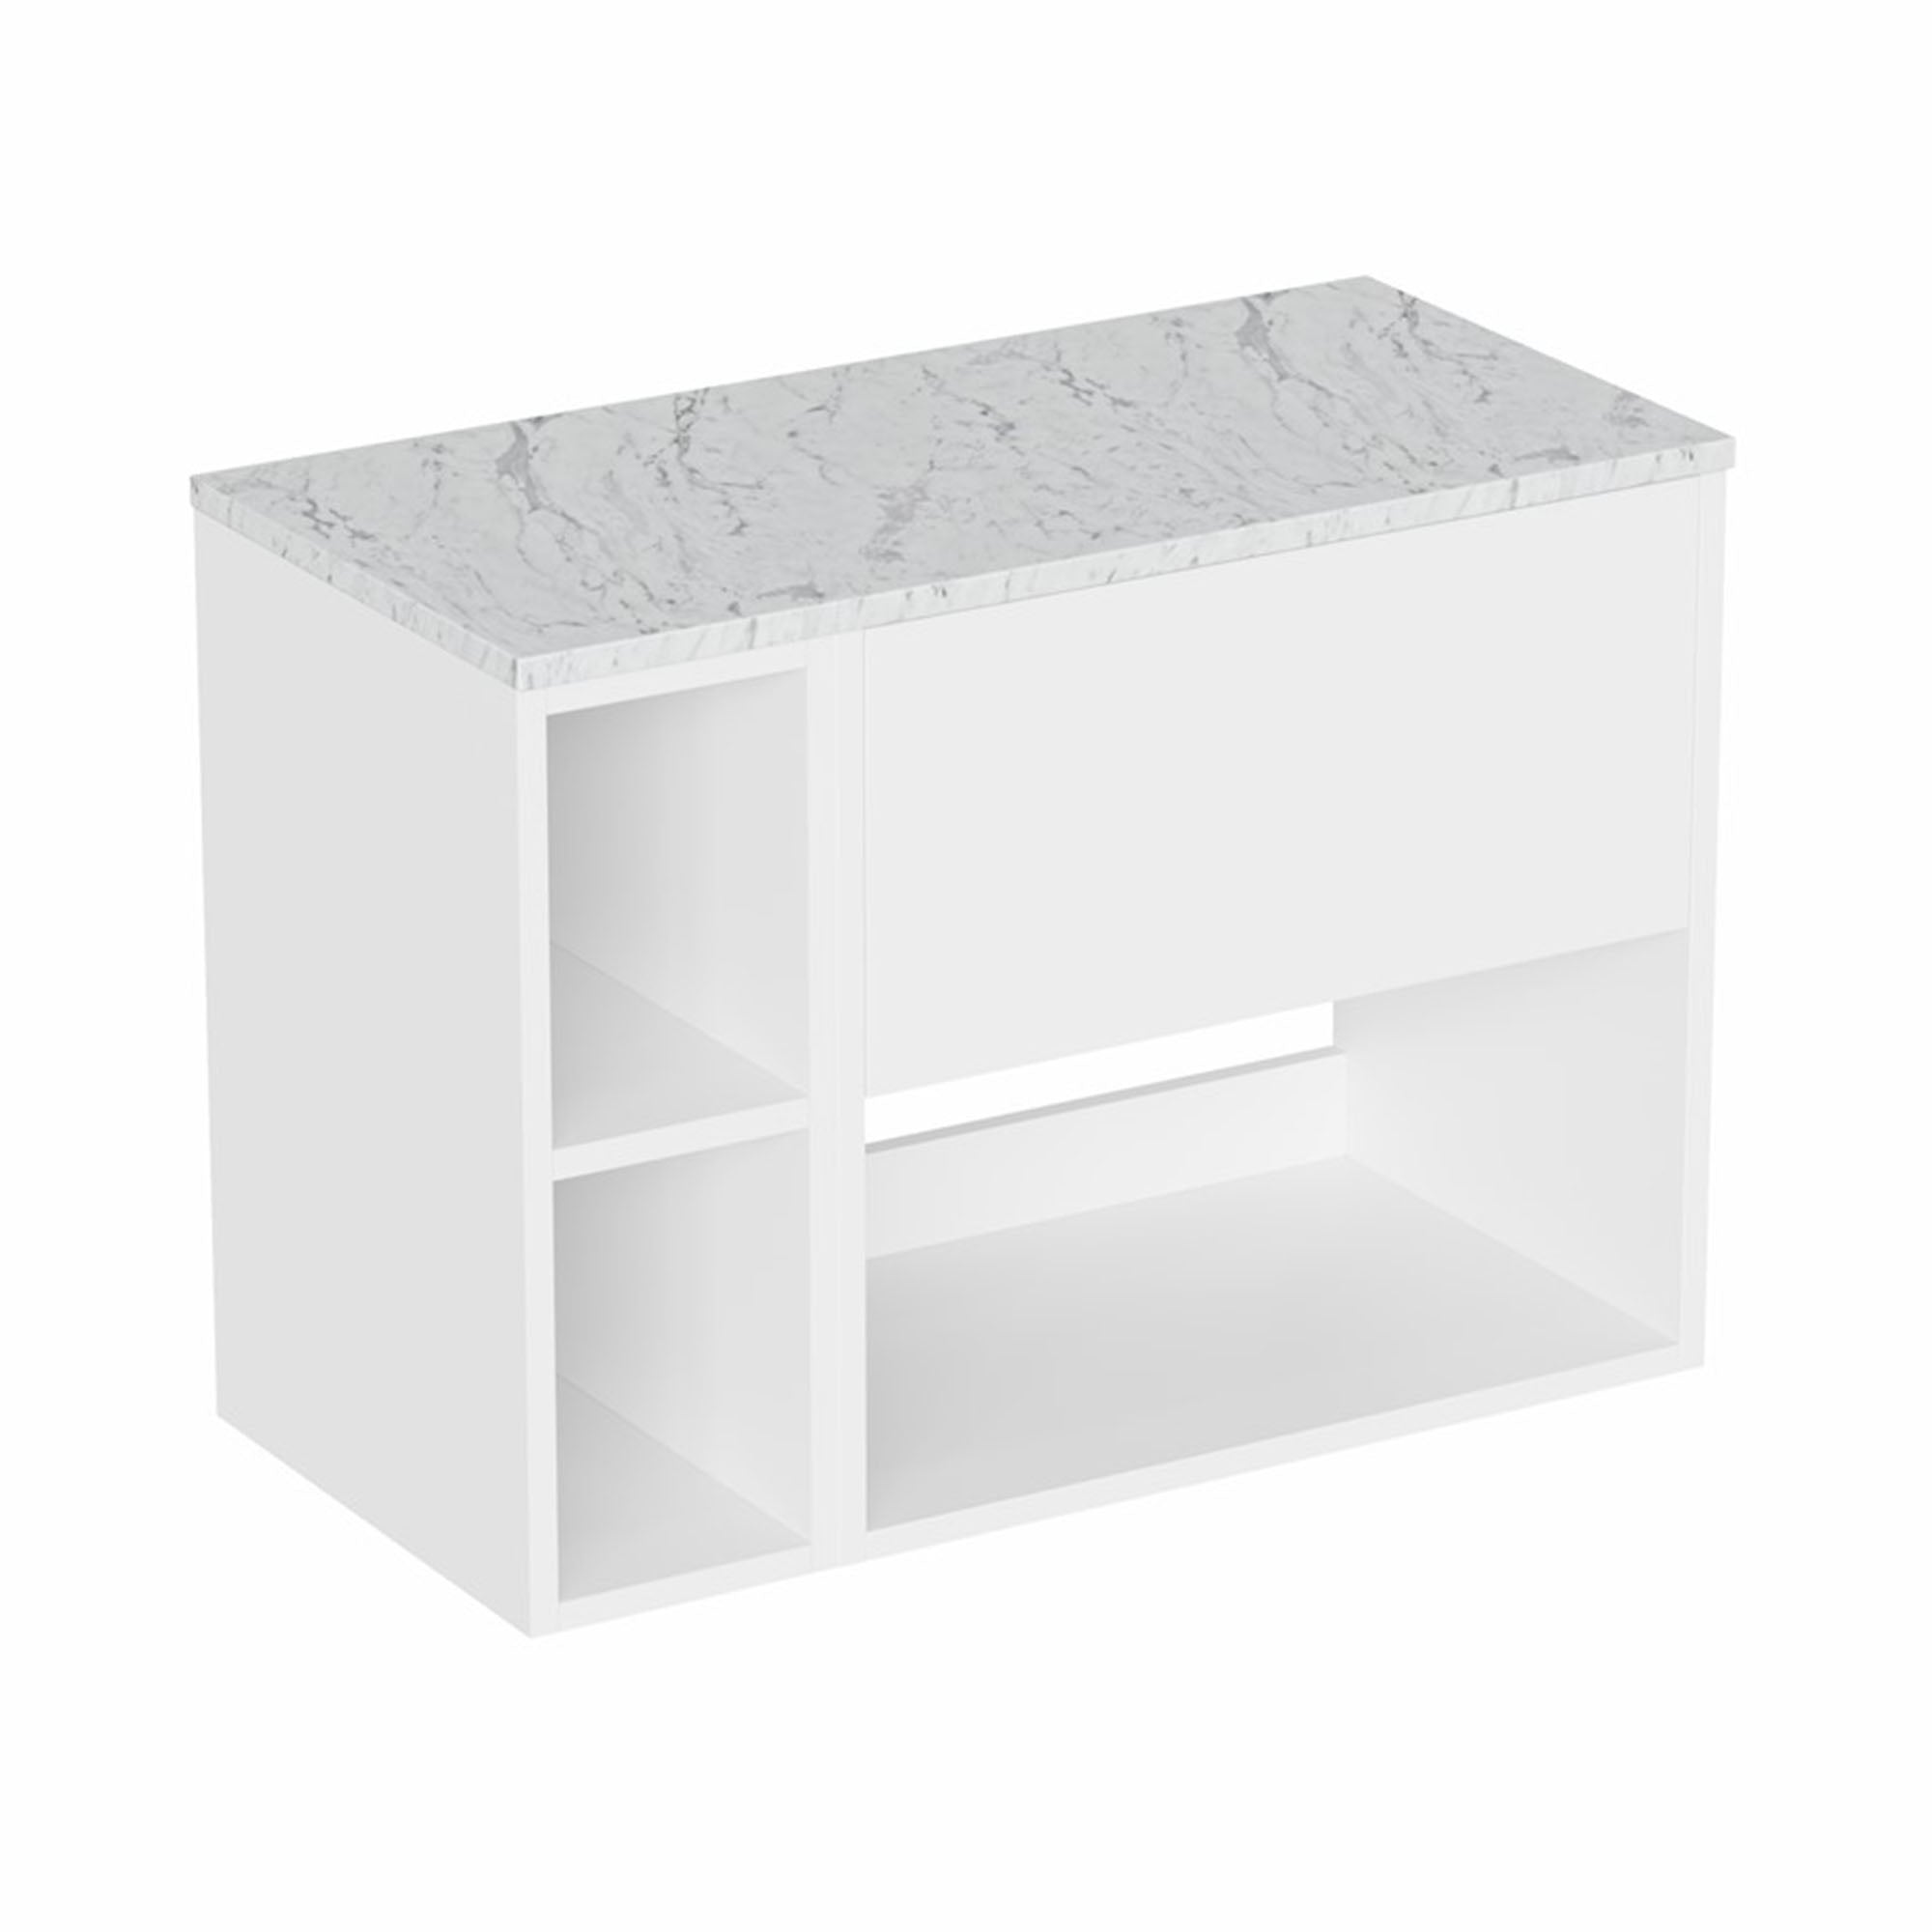 hackney 800 wall mounted vanity unit with carrara worktop and shelf unit gloss white